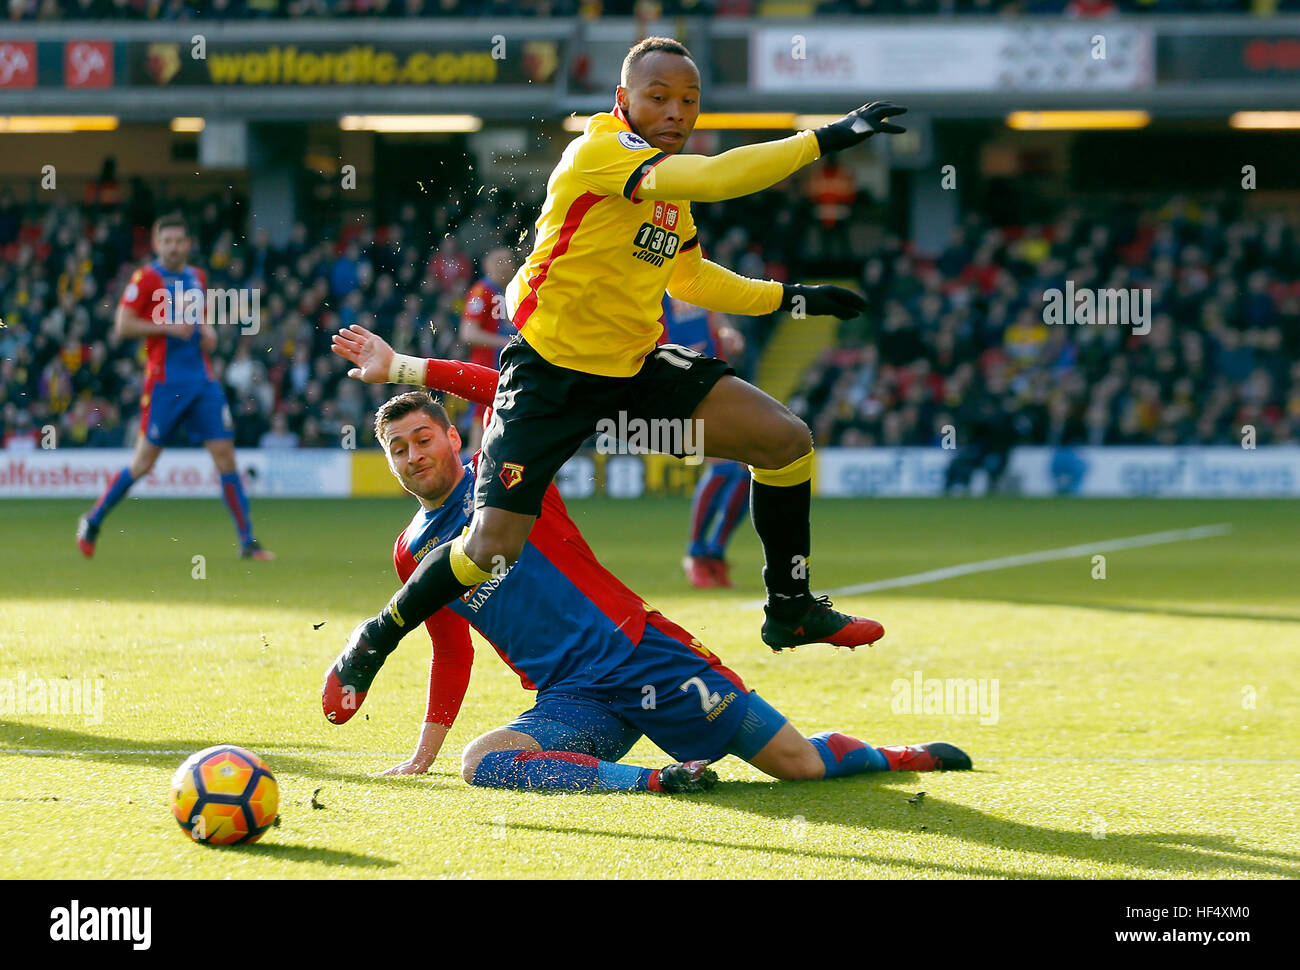 Crystal Palace's Joel Ward (left) and Watford's Juan Camilo Zuniga (right) battle for the ball during the Premier League match at Vicarage Road, Watford. Stock Photo